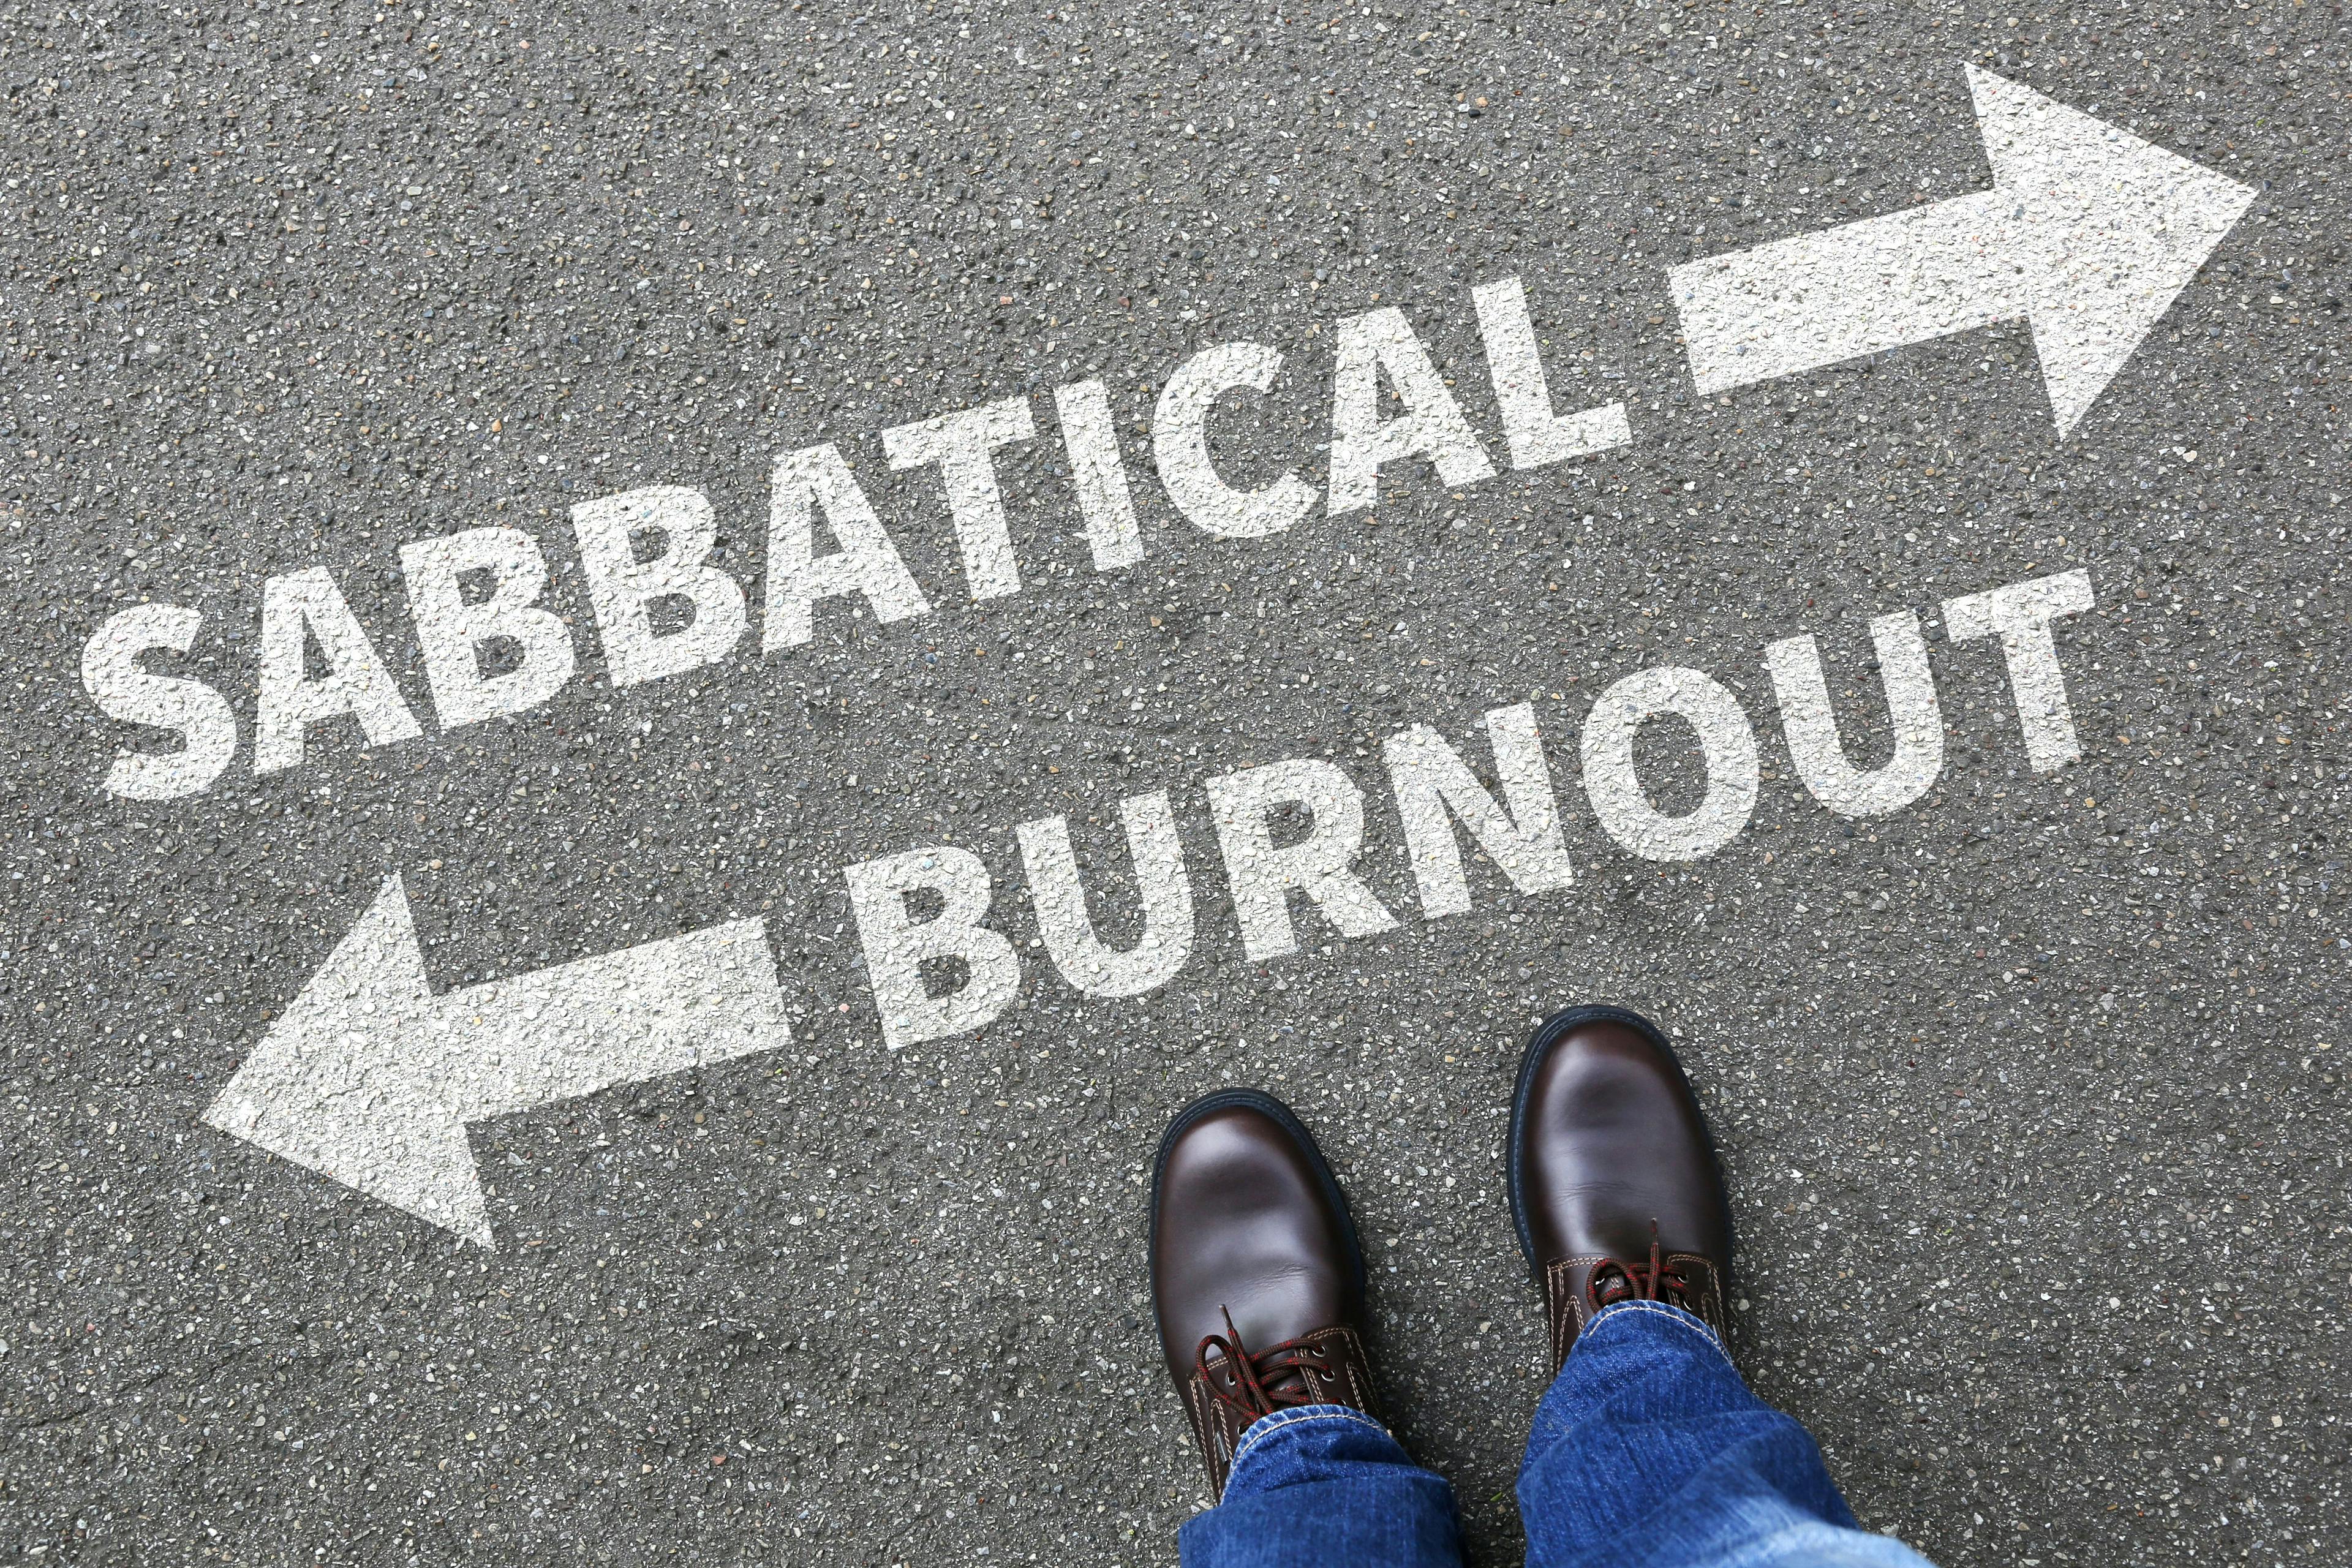 an image of the asphault with a white arrow pointing one way next to "sabbatical" and an arrow pointing the other way next to "burnout" and there's feet of a person in the bottom of the image